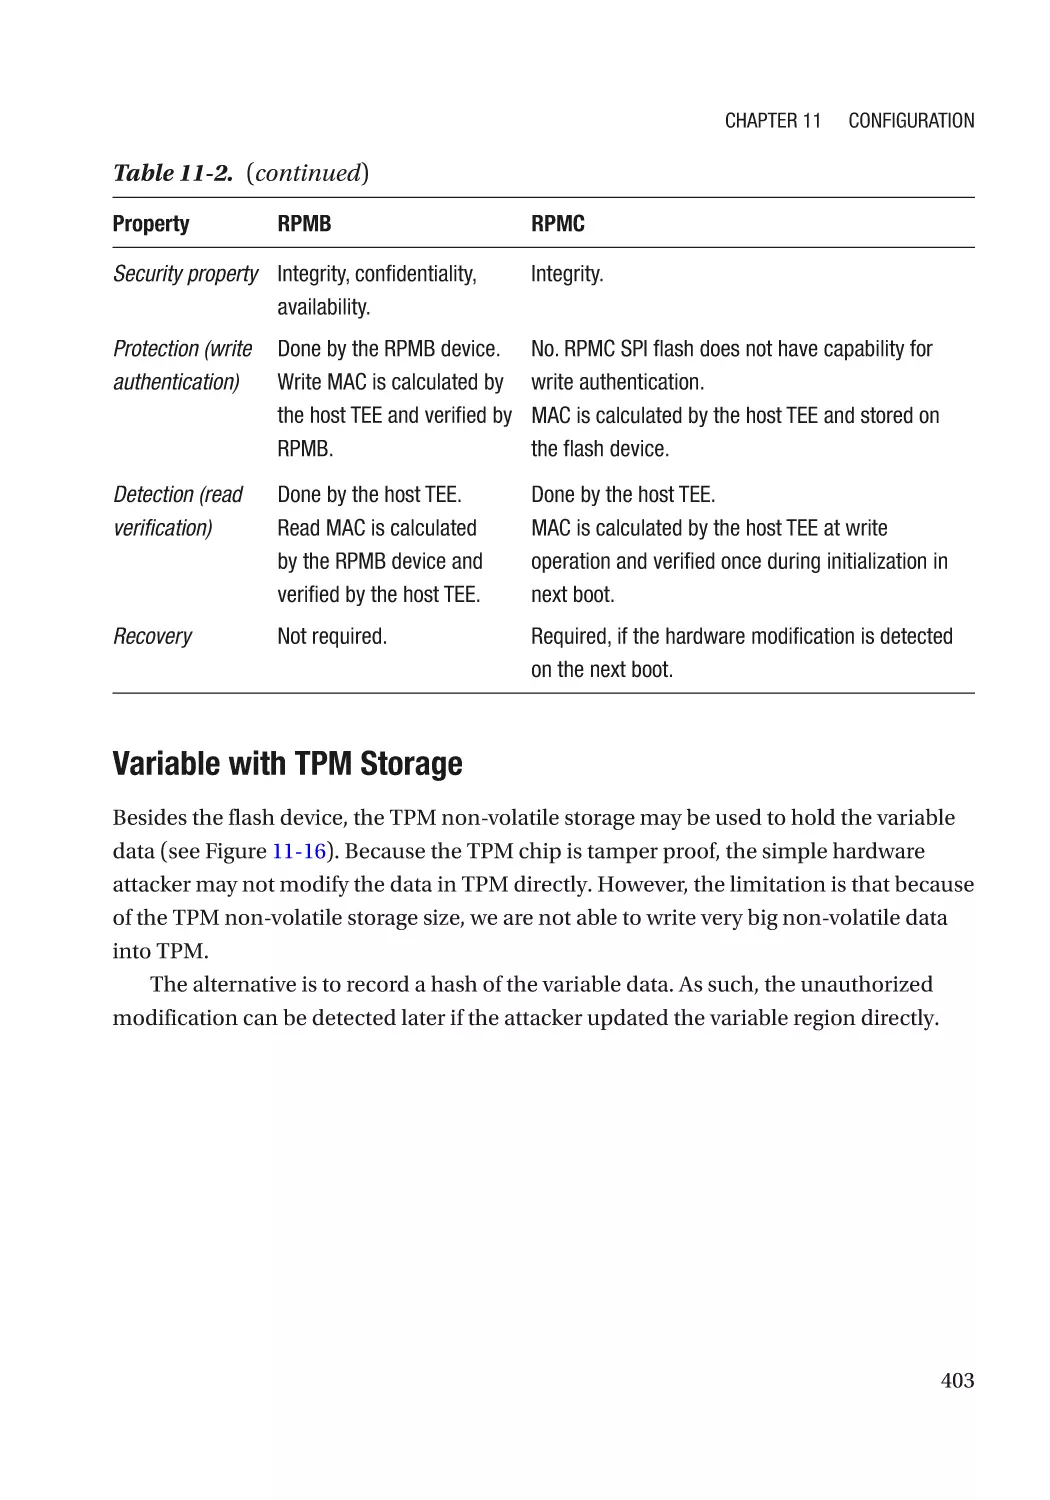 Variable with TPM Storage